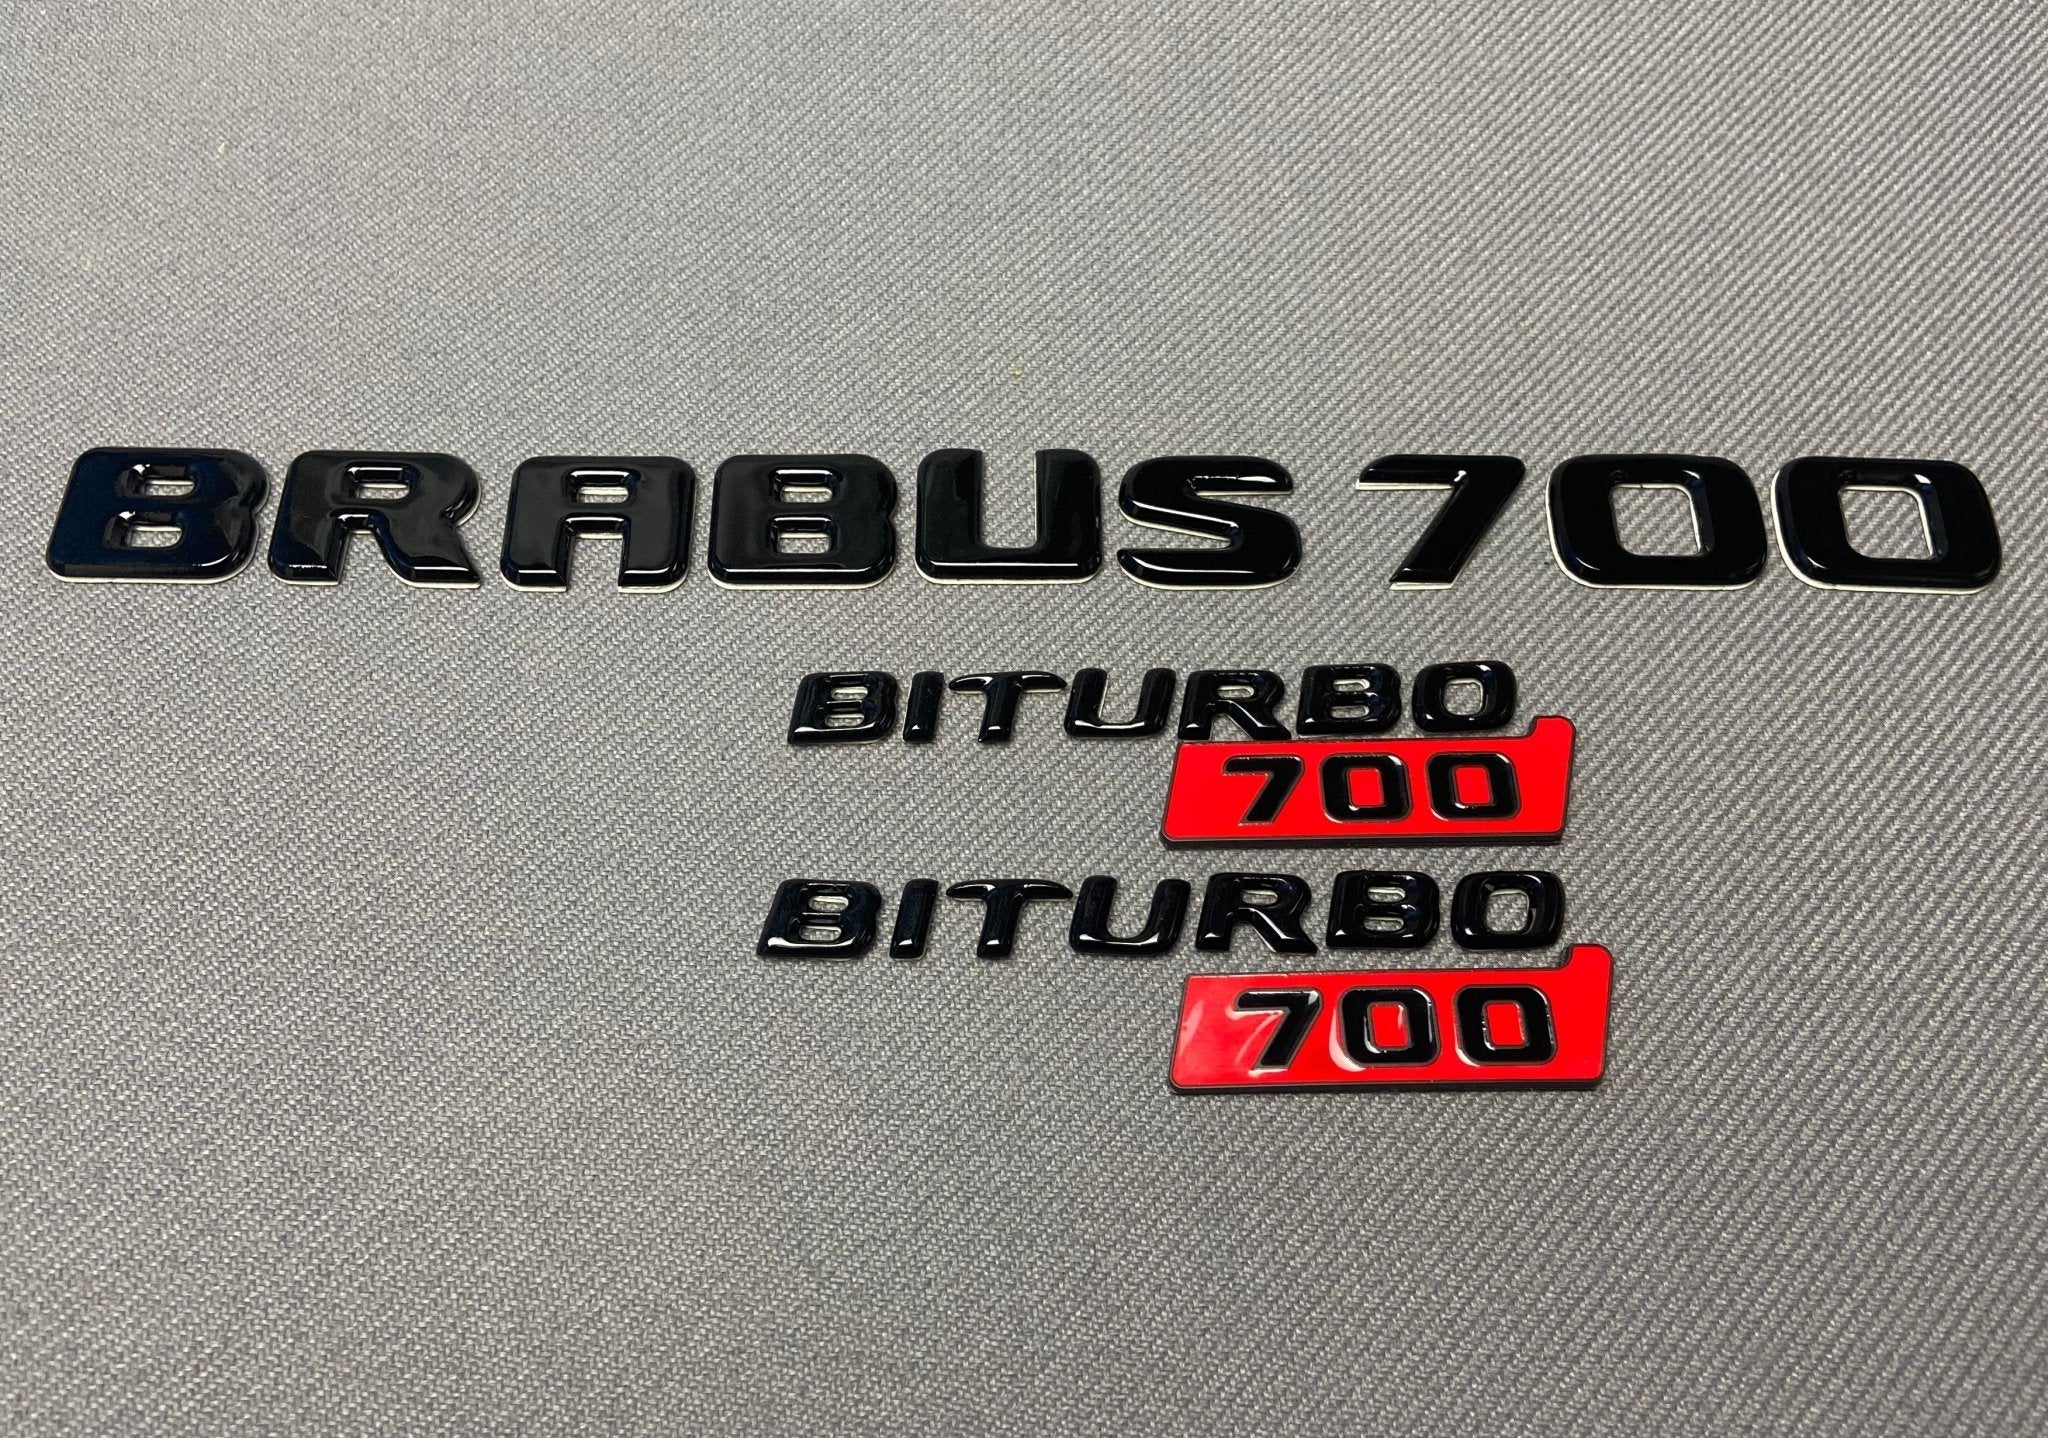 Brabus style set of Badges 700 G700 biturbo Compatible with Mercedes-Benz W463 W463A G-Wagon G-Class